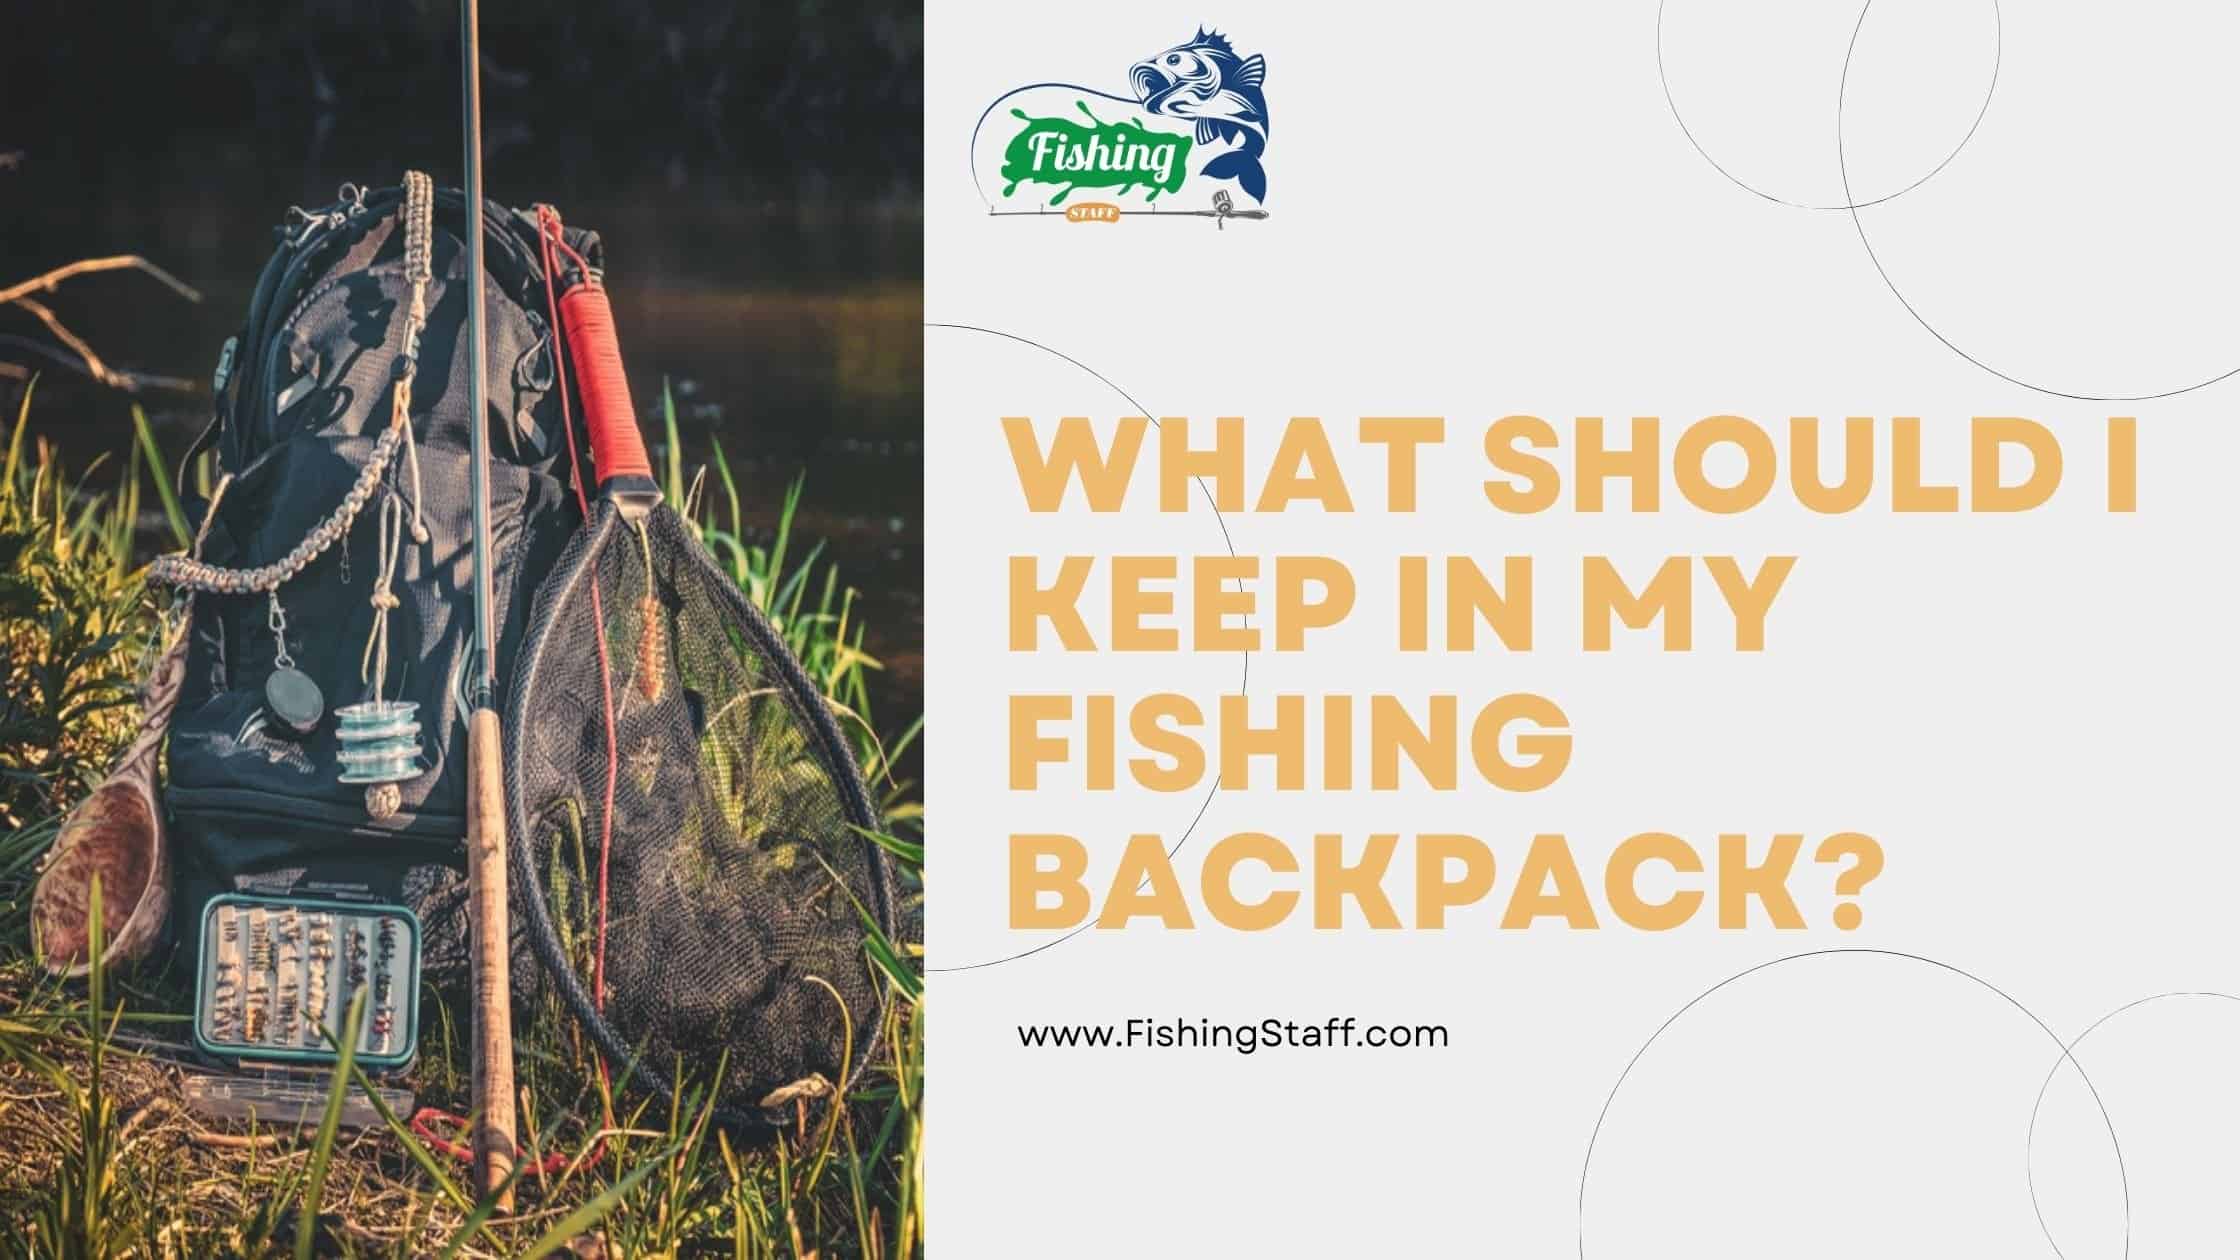 What should I keep in my fishing backpack